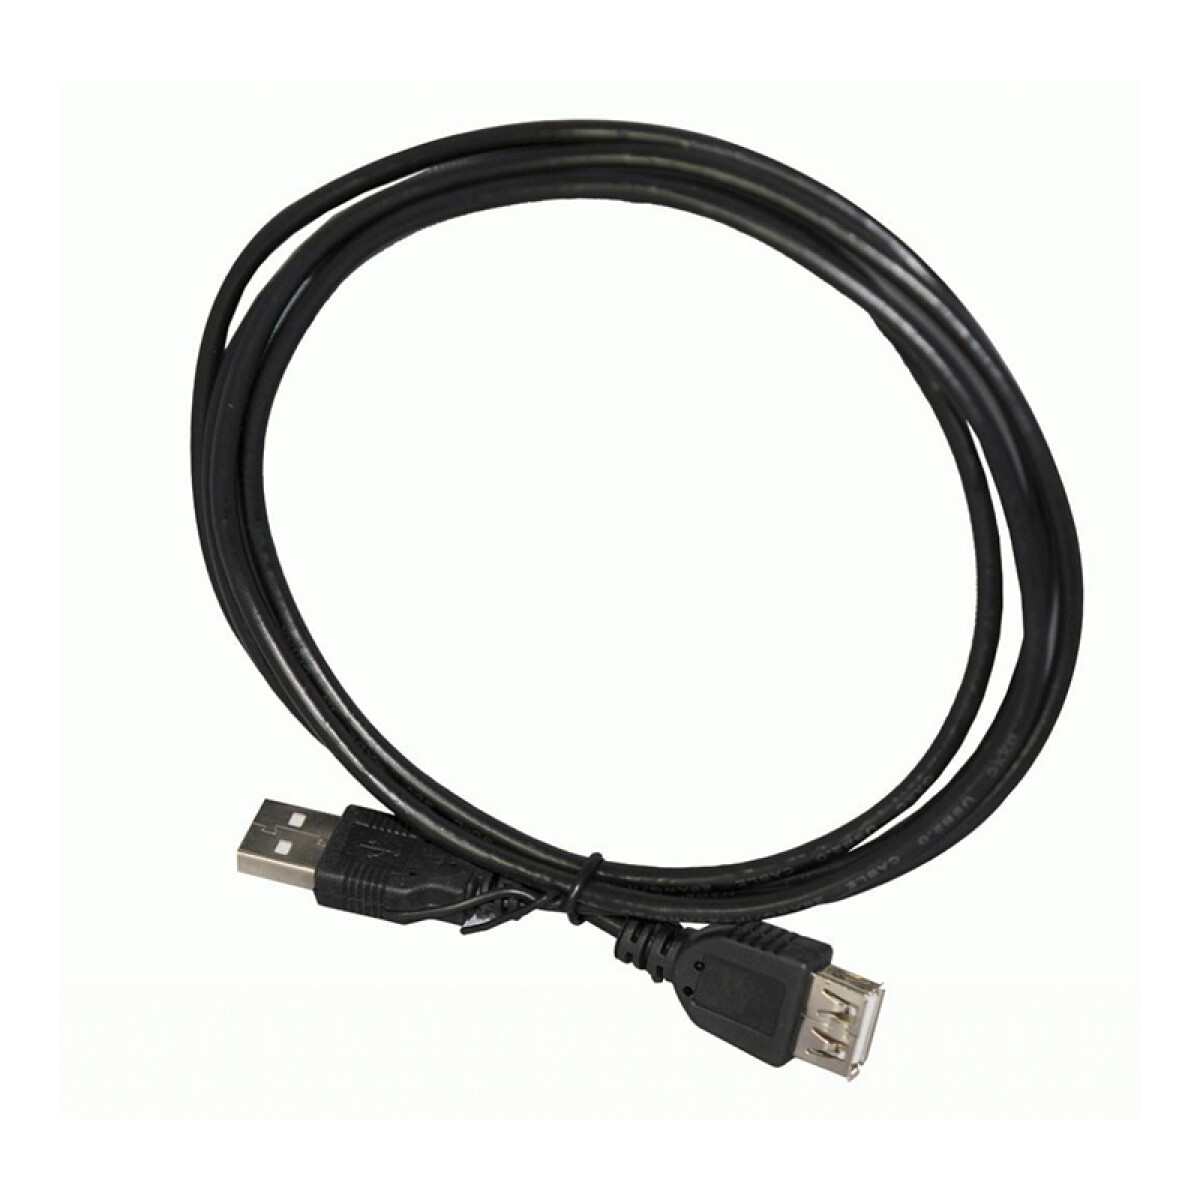 Cable Extensor USB 3 mts. 